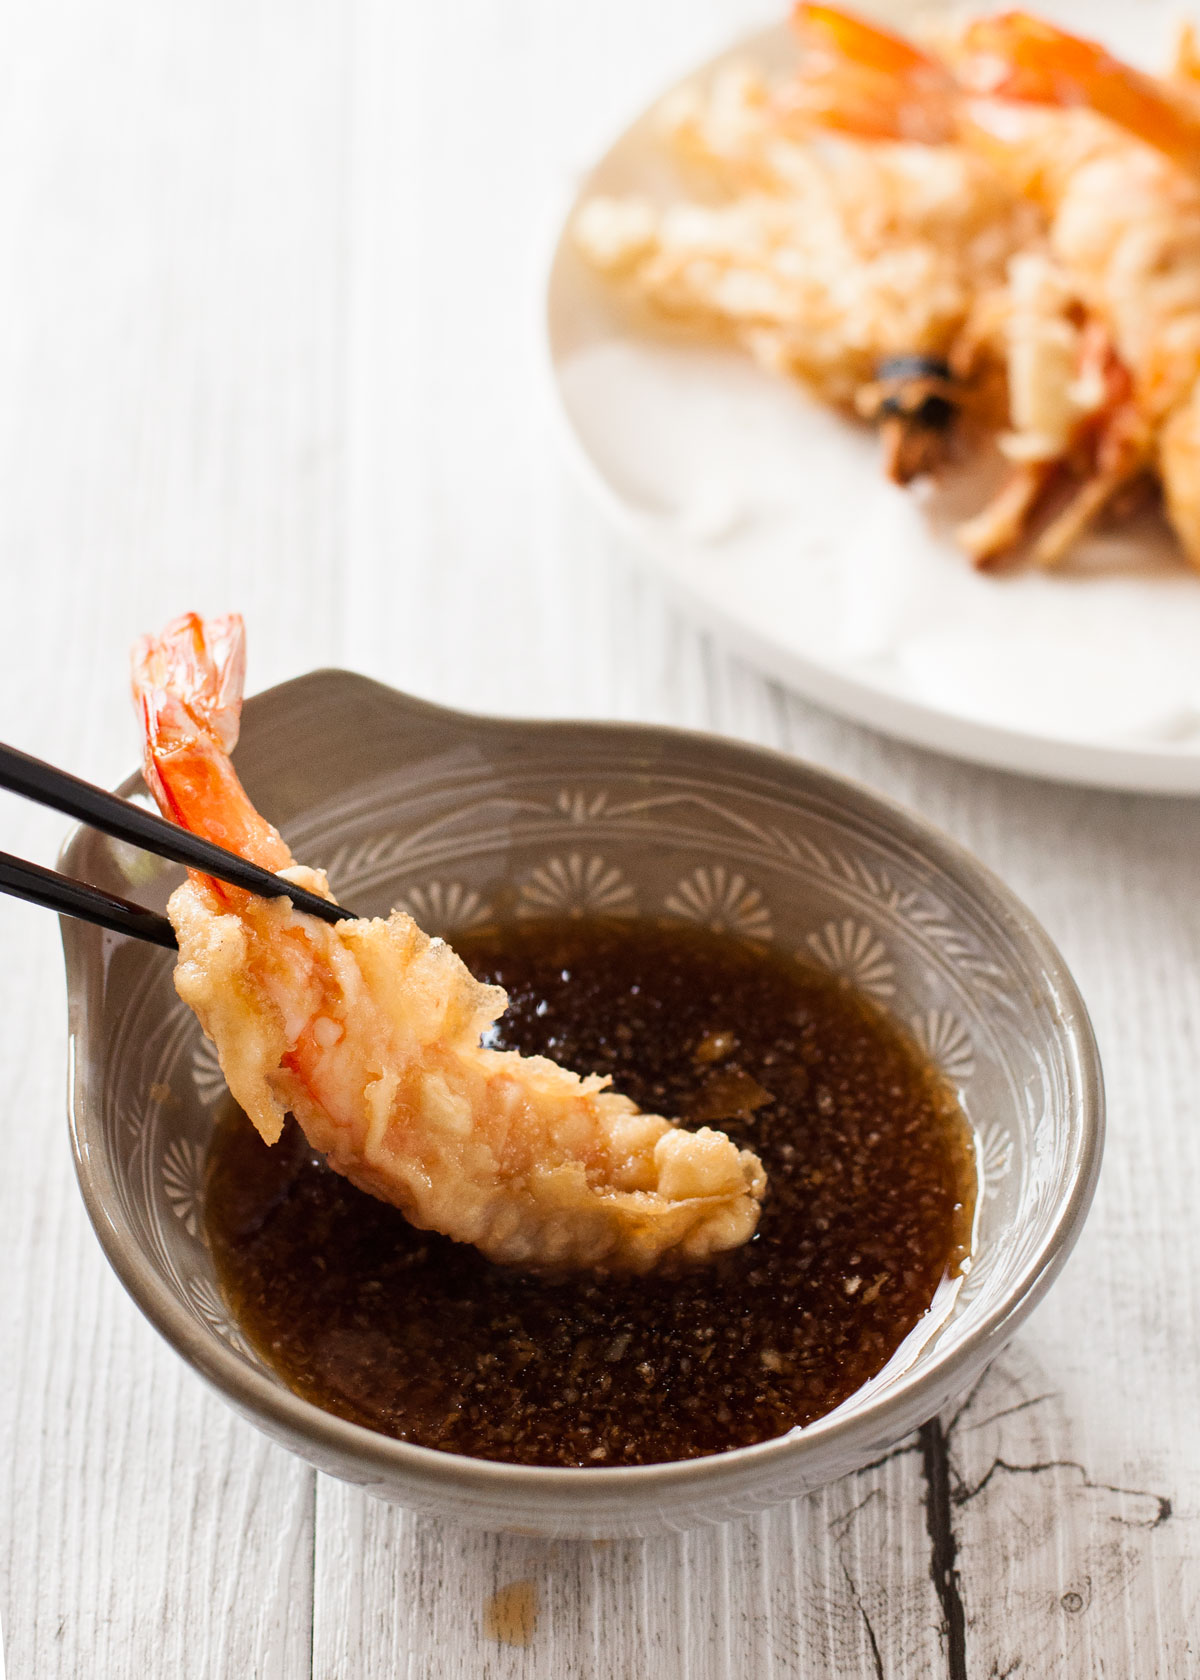 Learn how to make Tempura, one of the most iconic foods of Japan! japan.recipetineats.com